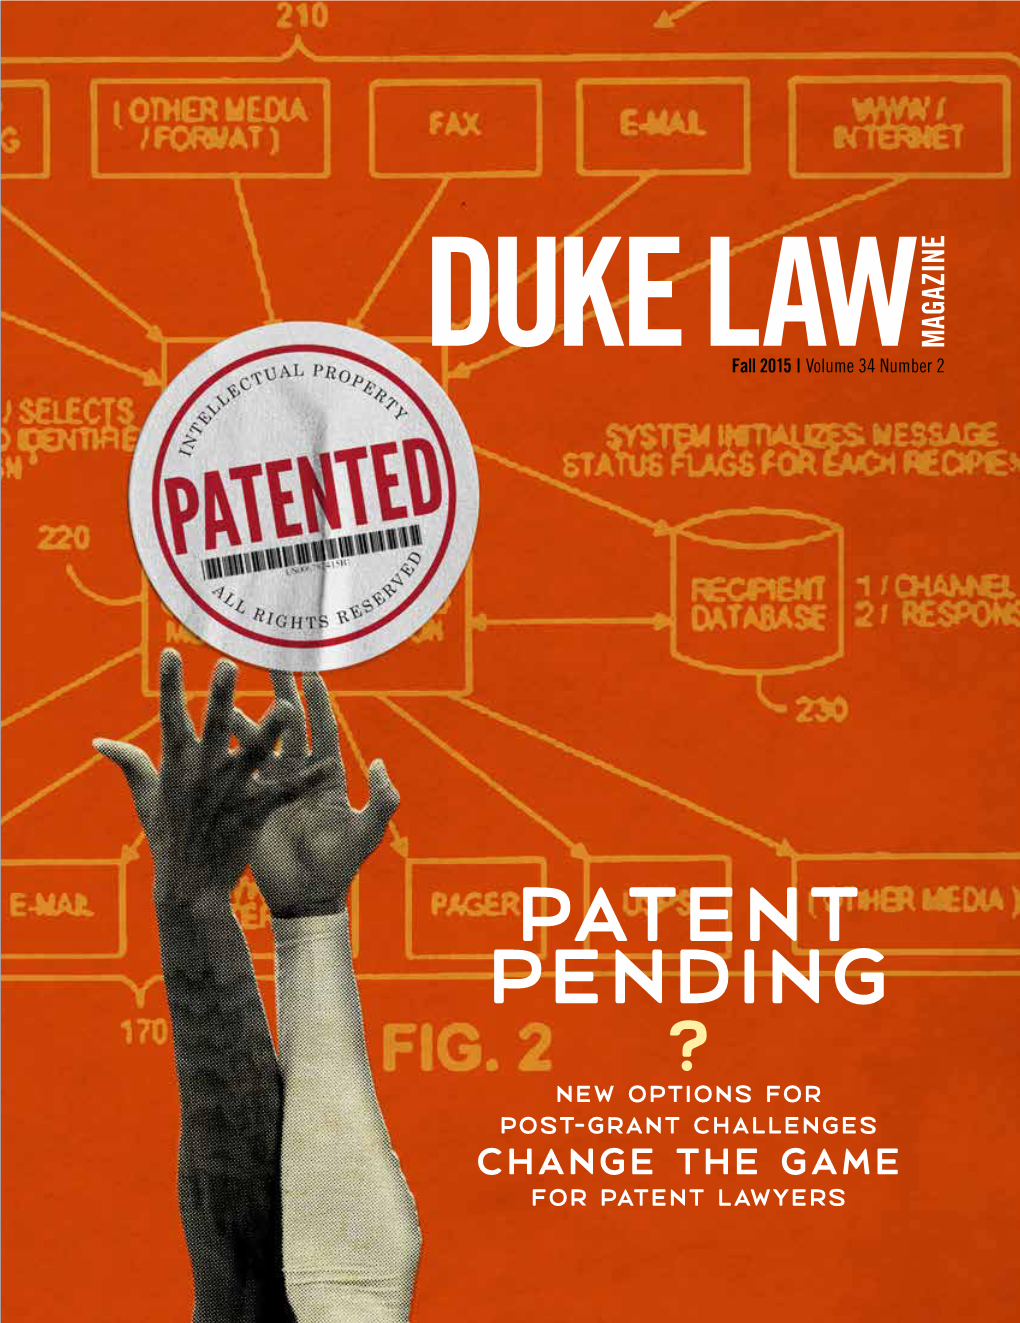 PATENT PENDING ? New Options for Post-Grant Challenges Change the Game for Patent Lawyers